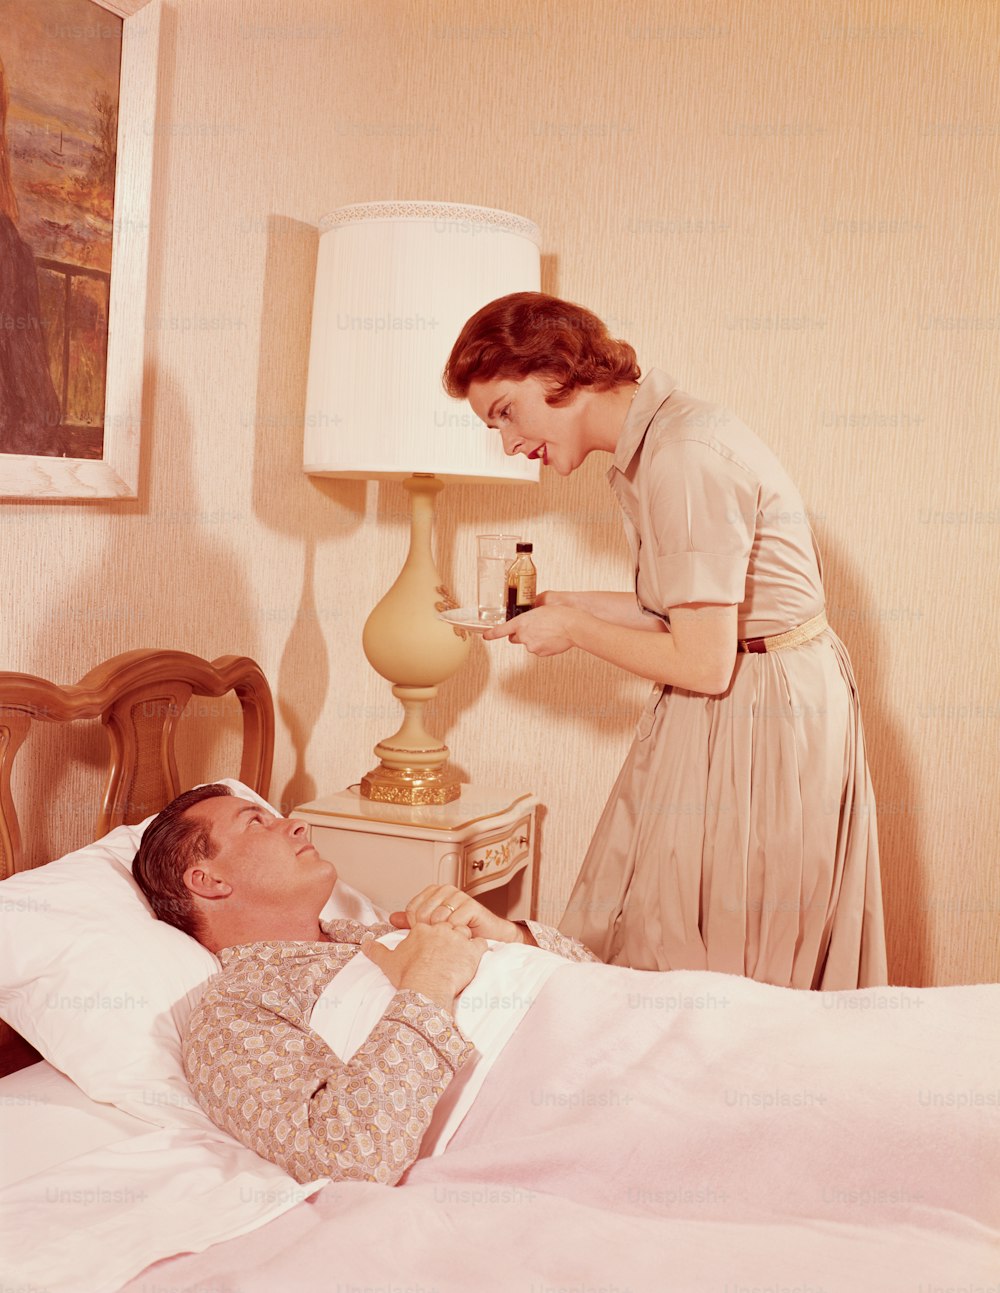 UNITED STATES - CIRCA 1960s:  Woman carrying tray of medicine to sick husband in bed.